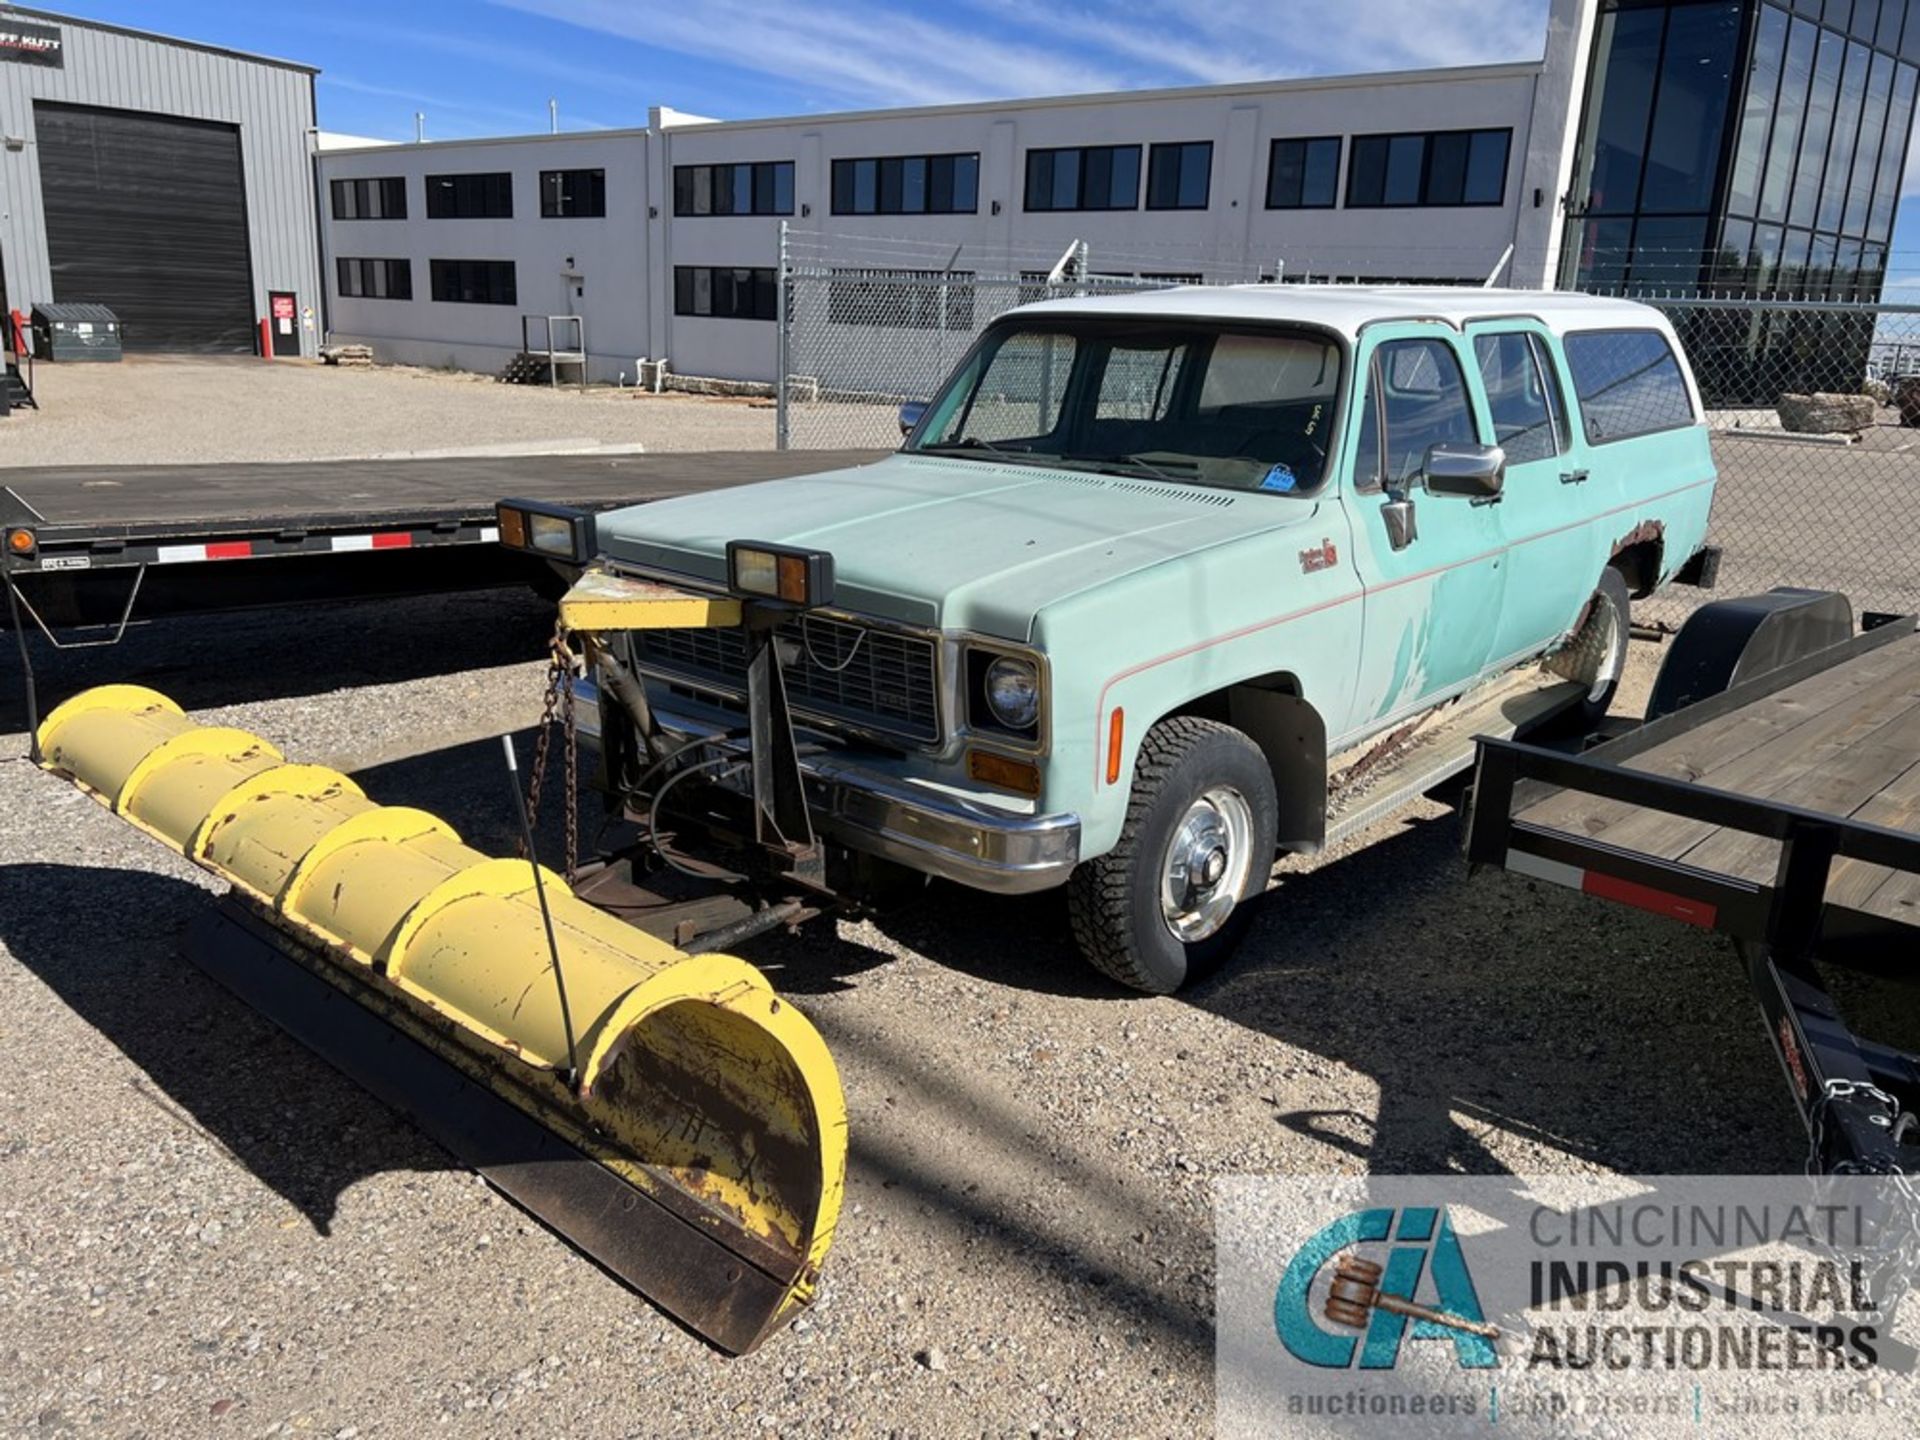 1978 CHEVY CUSTOM DELUX 2 WITH SNOW PLOW; VIN CKU268F128647, GASOLINE ENGINE, AUTOMATIC